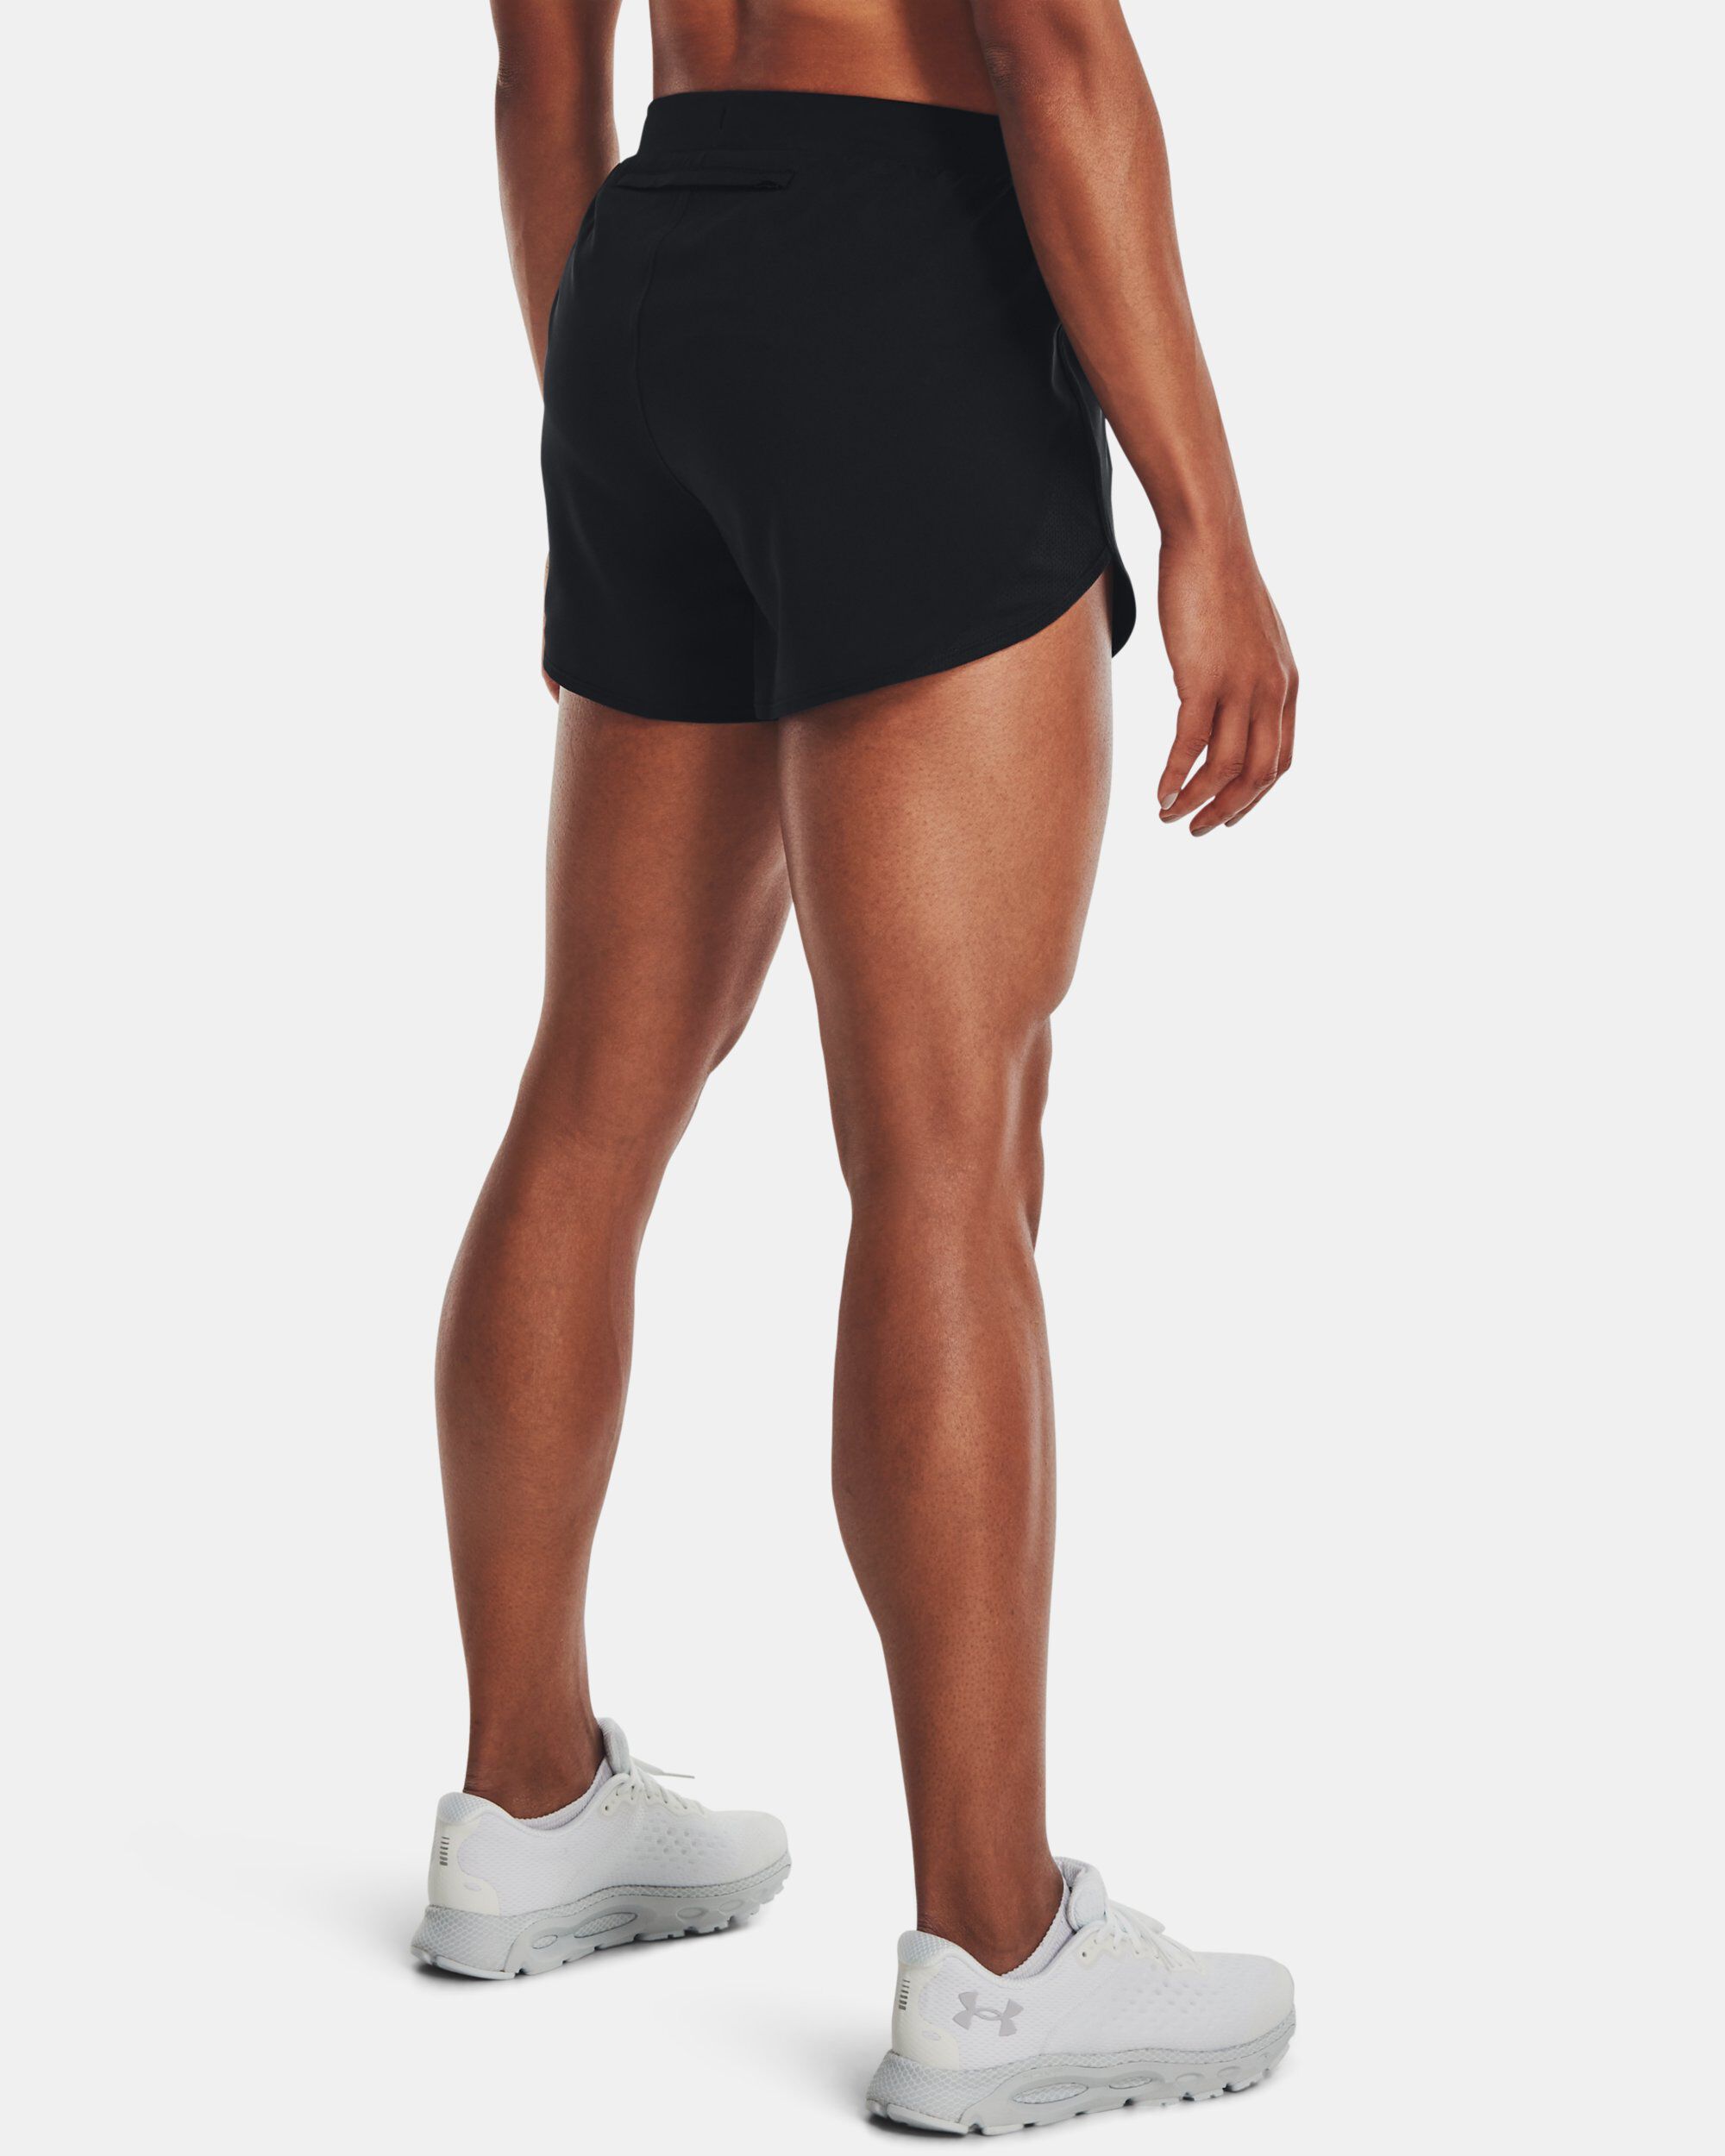 New Under Armour UA Women's Launch Tulip 2 in 1 Running Gym Shorts 